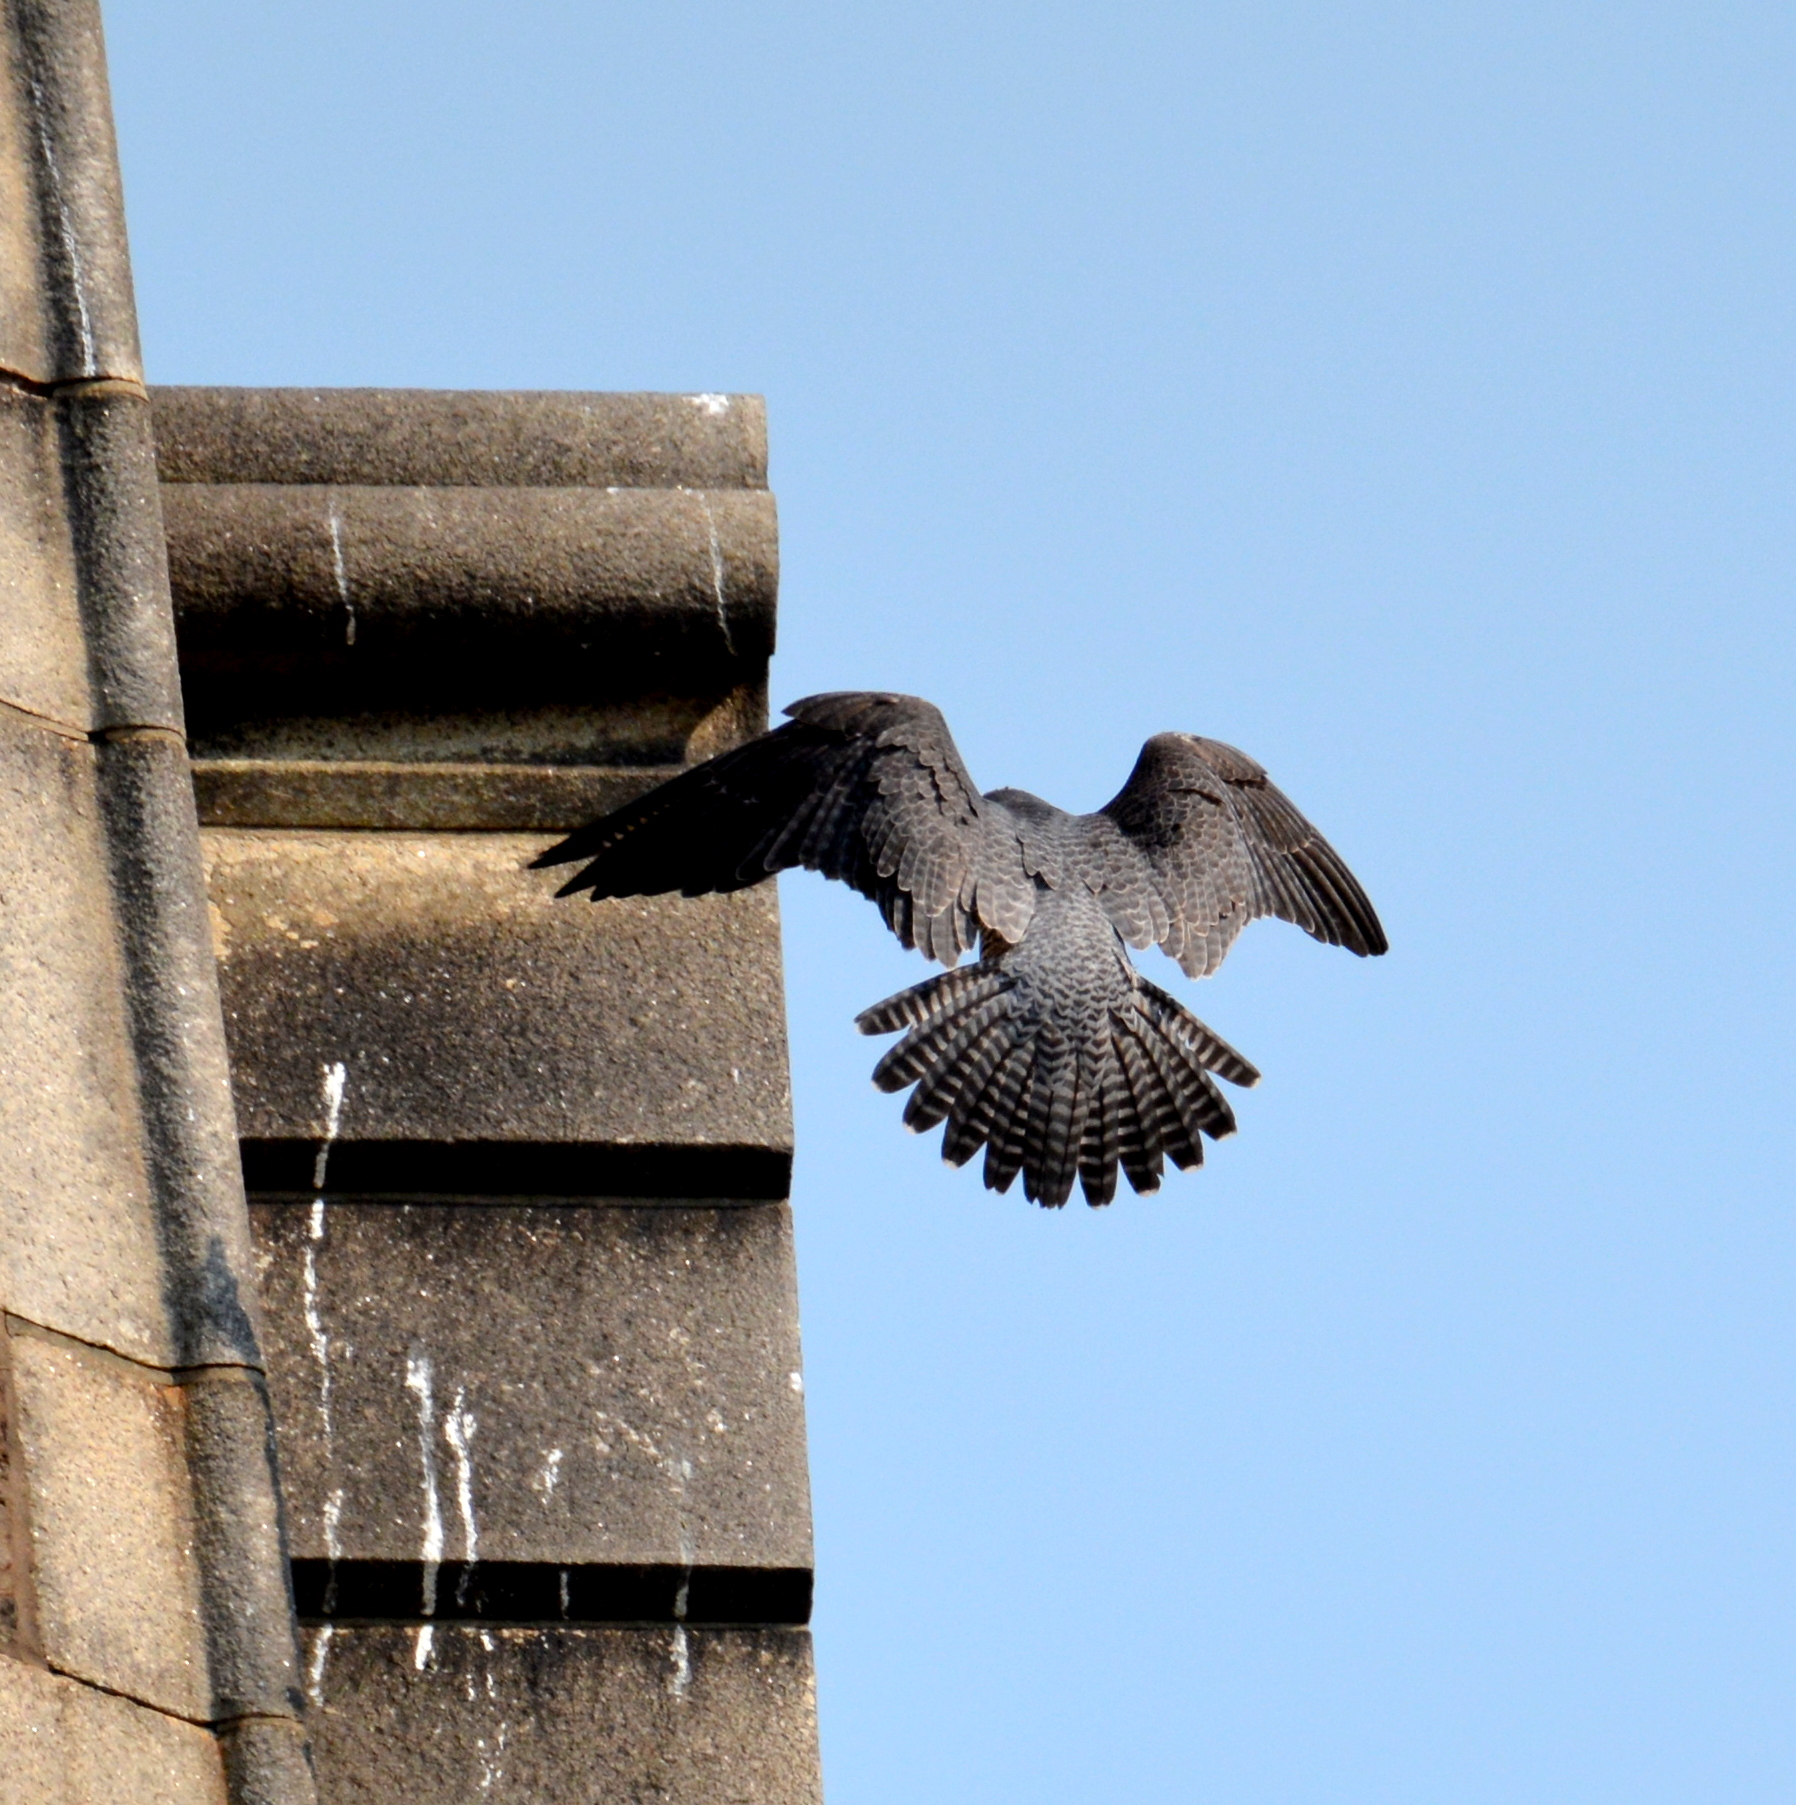 Astrid flies up to her perch on the steeple